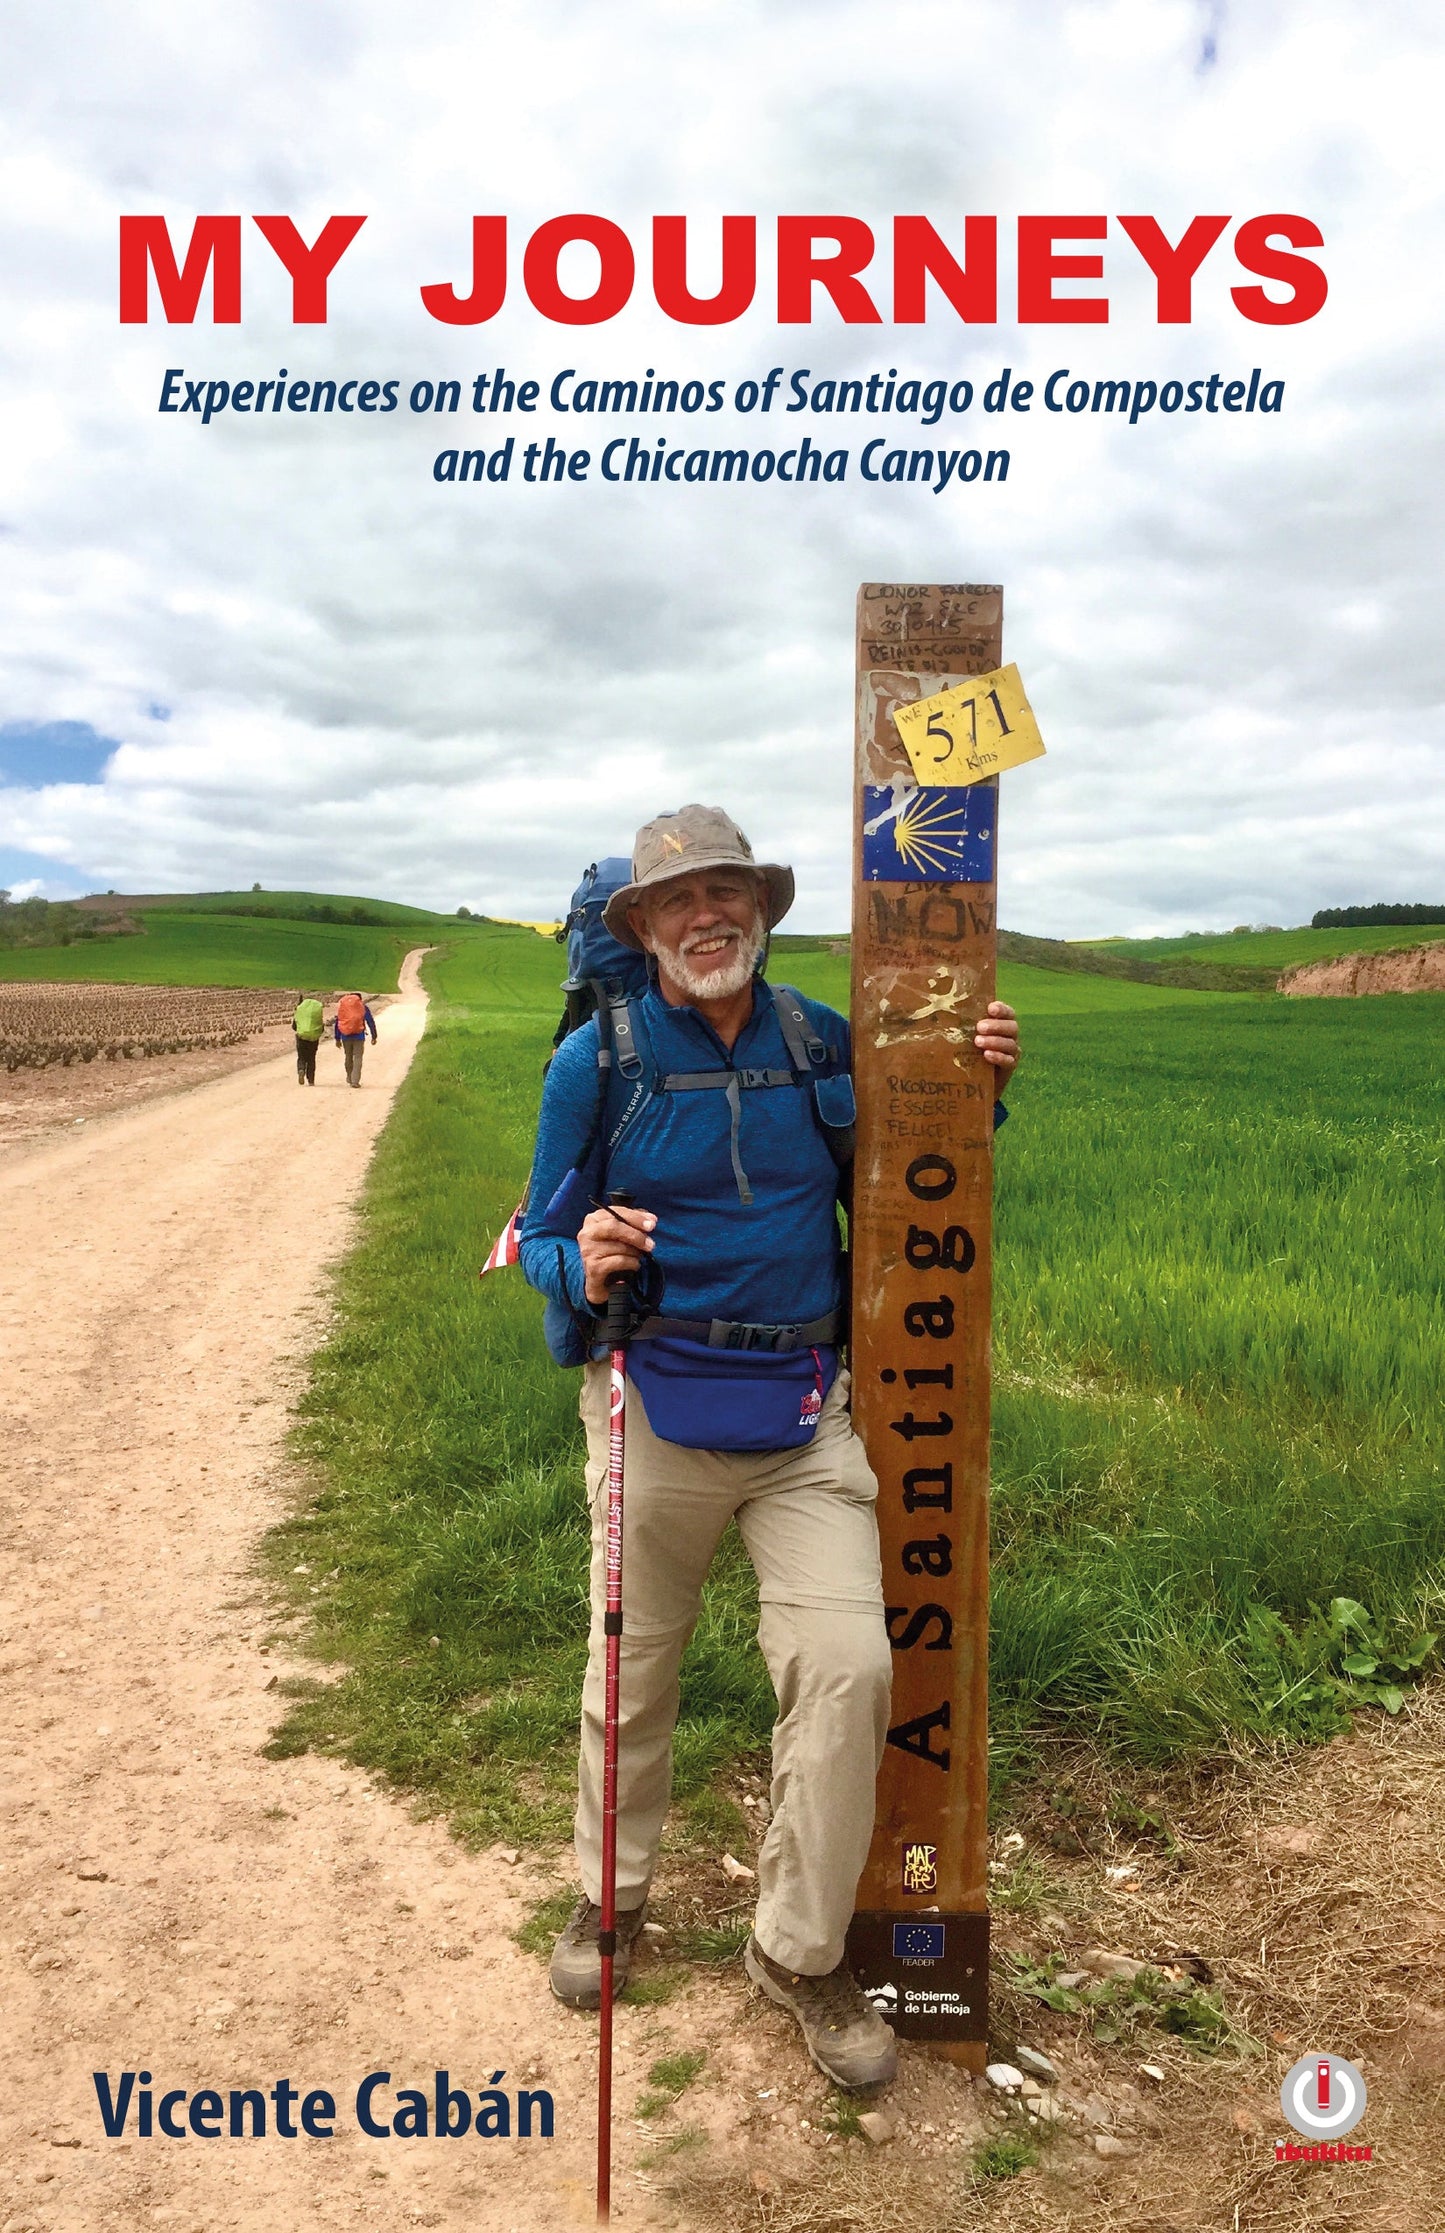 My Journeys: Experiences on the Caminos of Santiago de Compostela and the Chicamocha Canyon (Impreso)